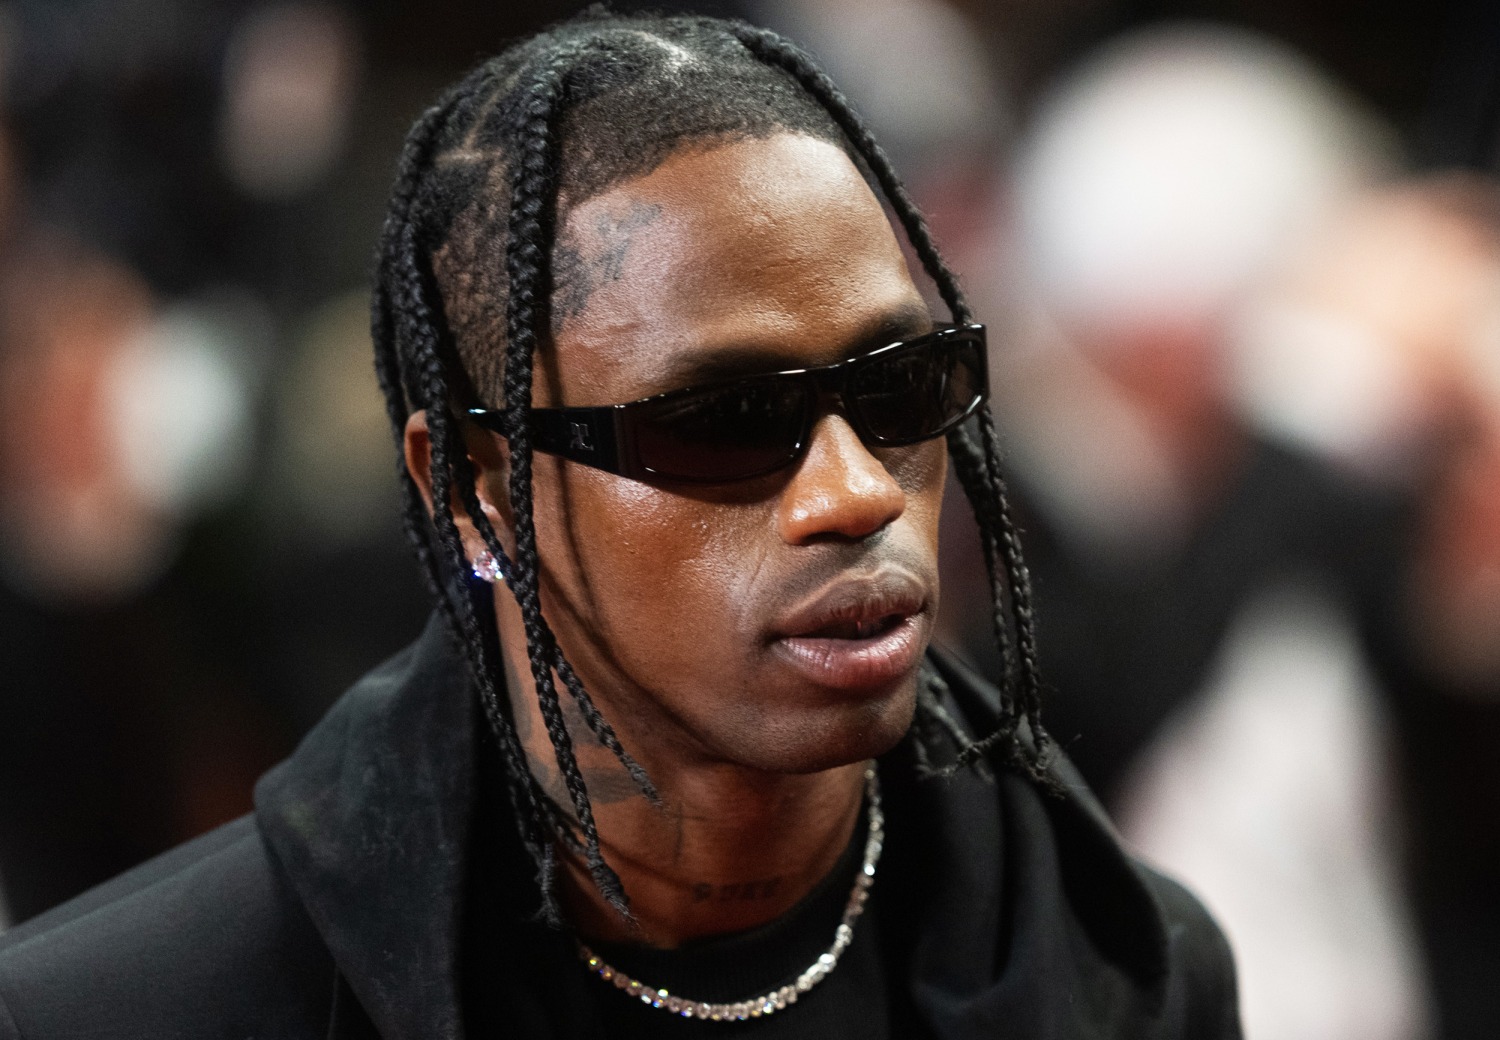 Travis Scott won't be criminally charged in Astroworld concert